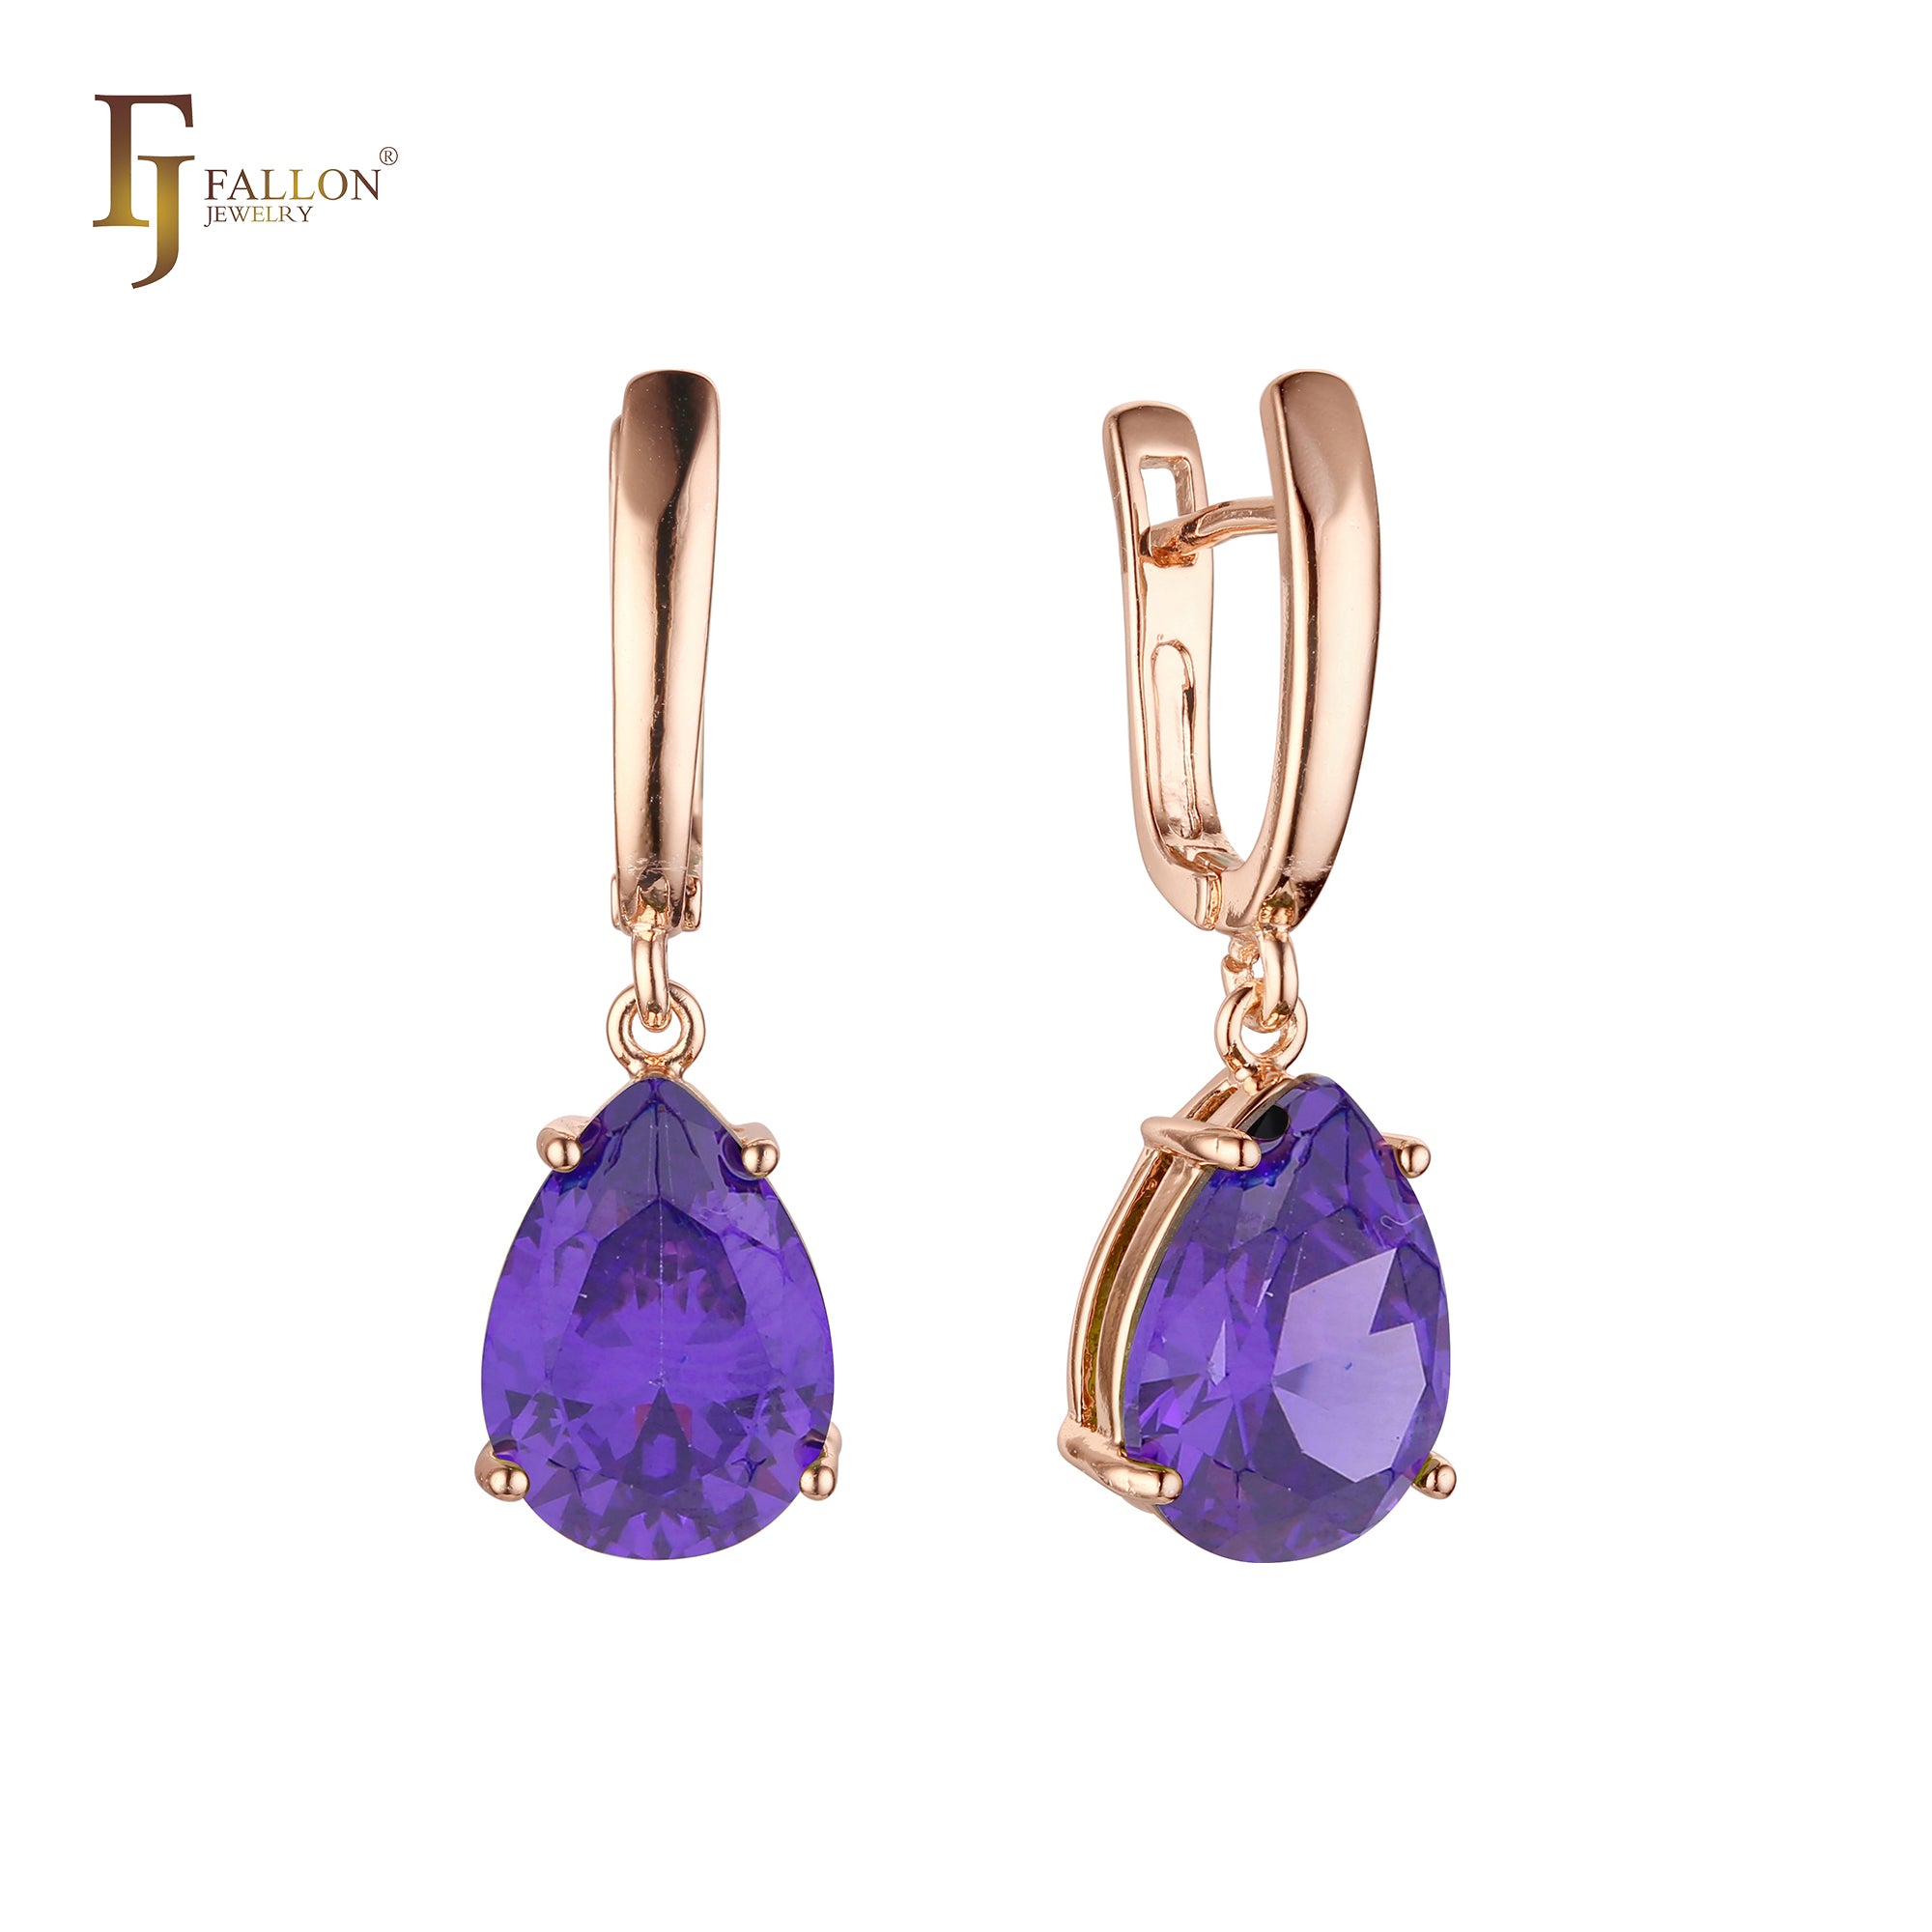 .Teardrop stone earrings in 14K Gold, Rose Gold, White Gold plating colors